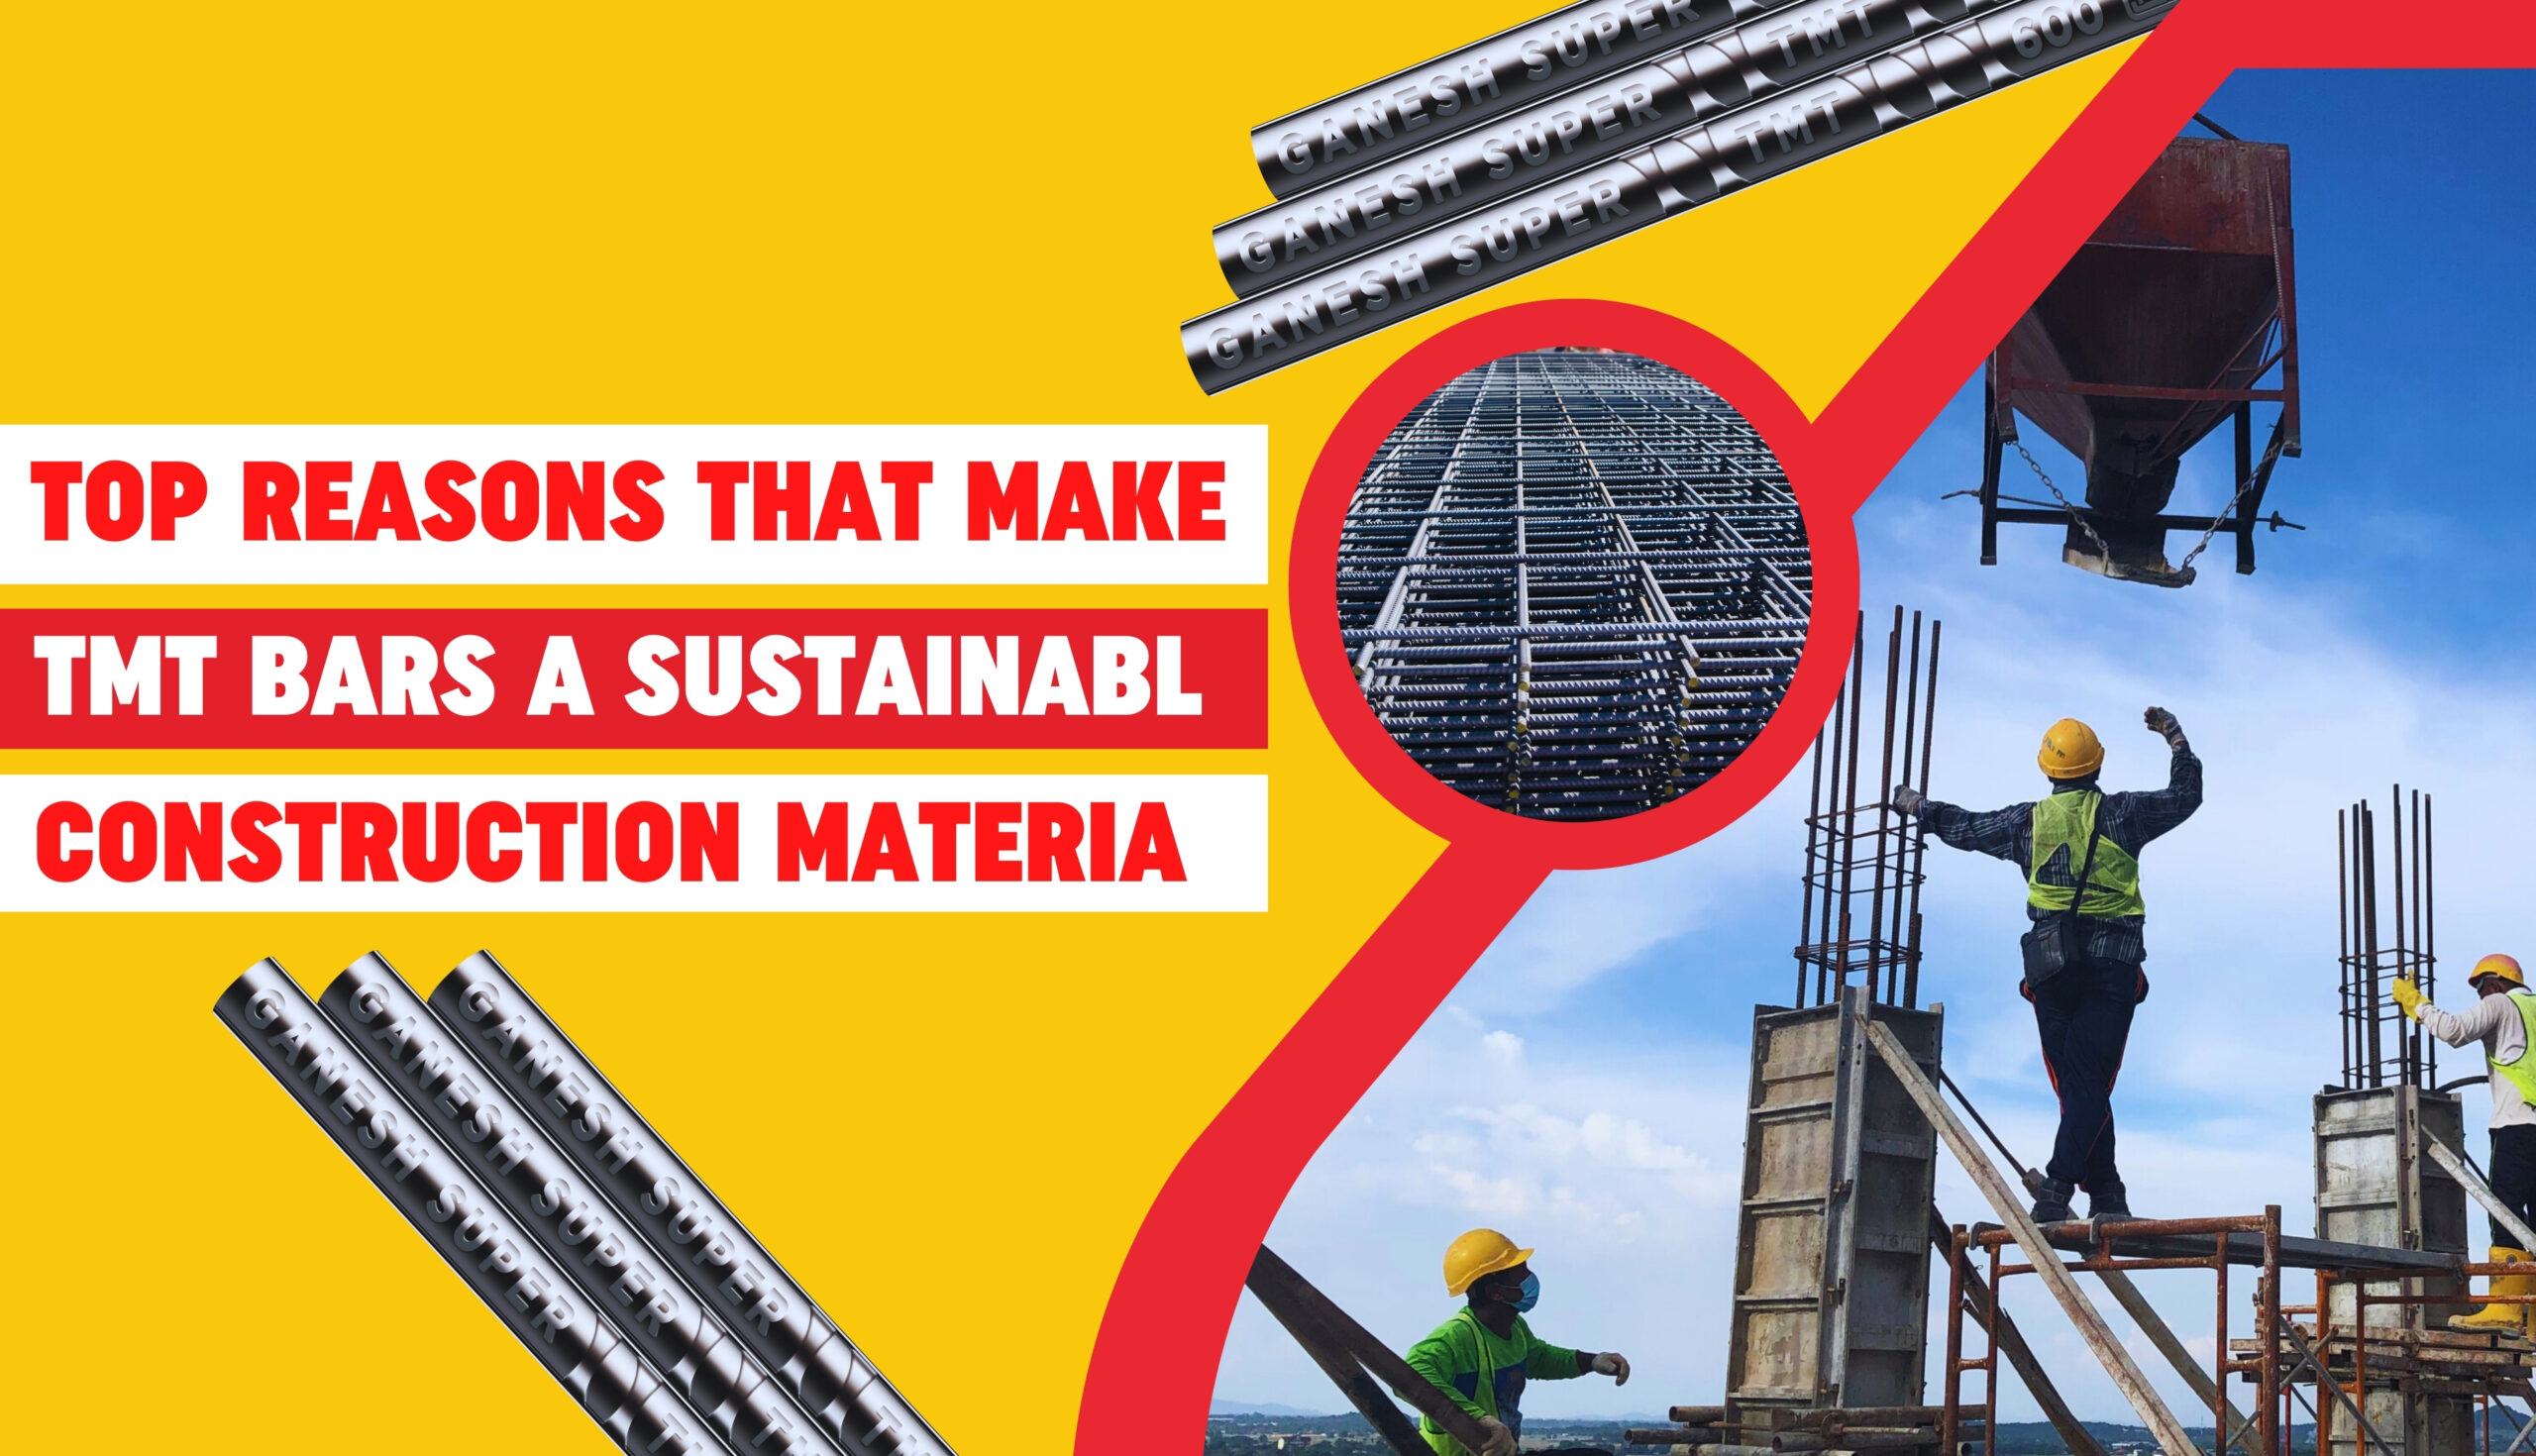 Top Reasons That Make TMT Bars a Sustainable Construction Material